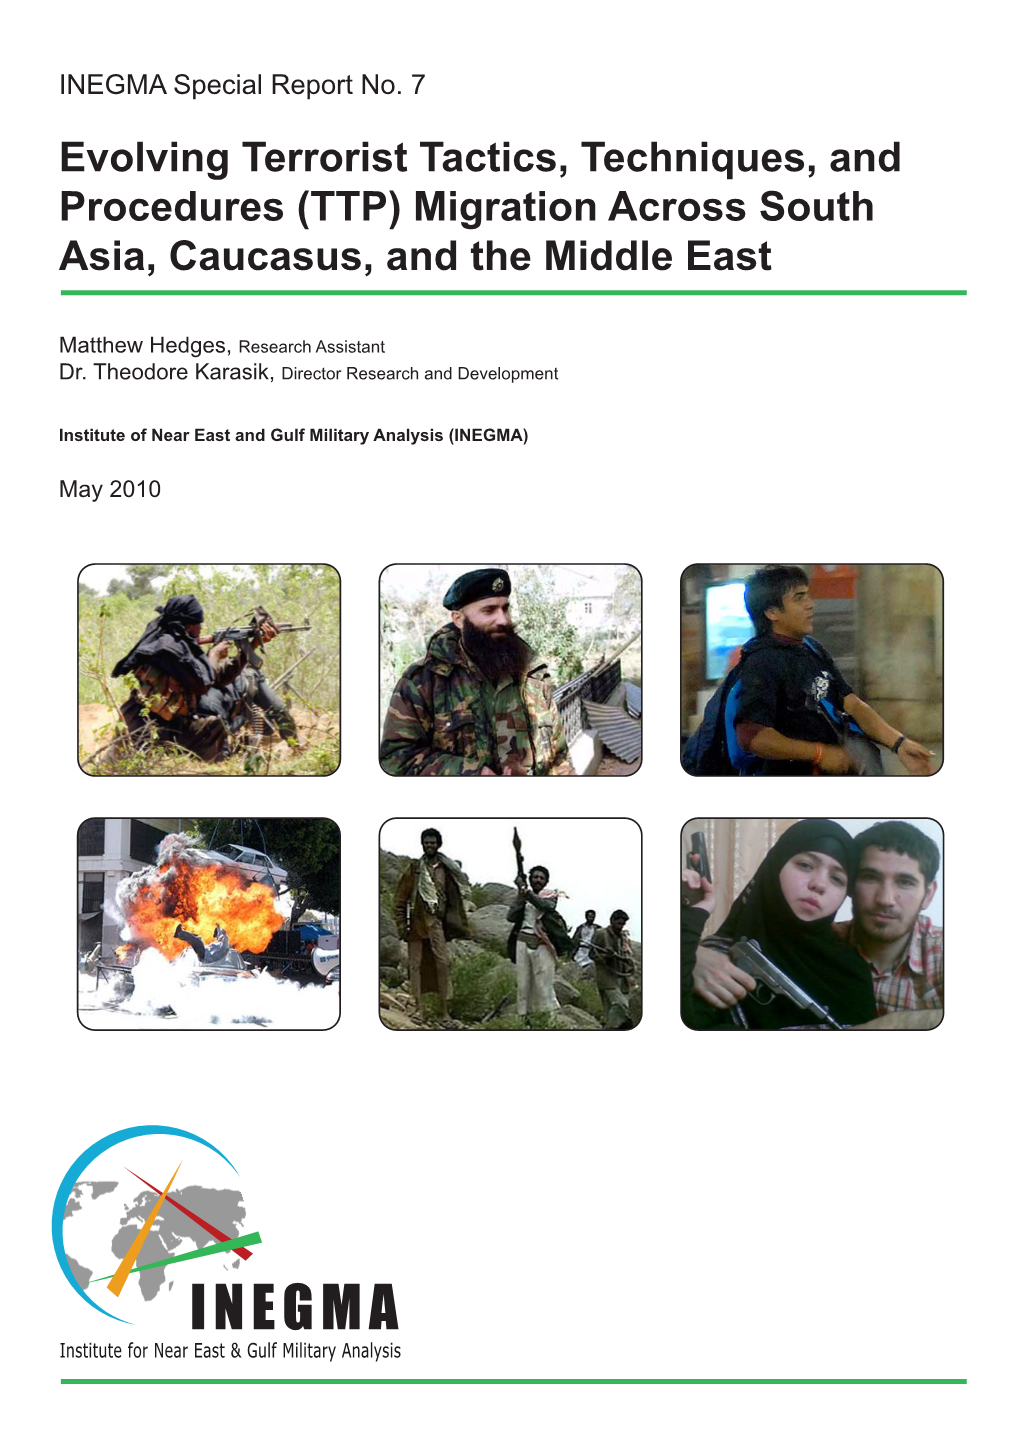 Evolving Terrorist Tactics, Techniques, and Procedures (TTP) Migration Across South Asia, Caucasus, and the Middle East